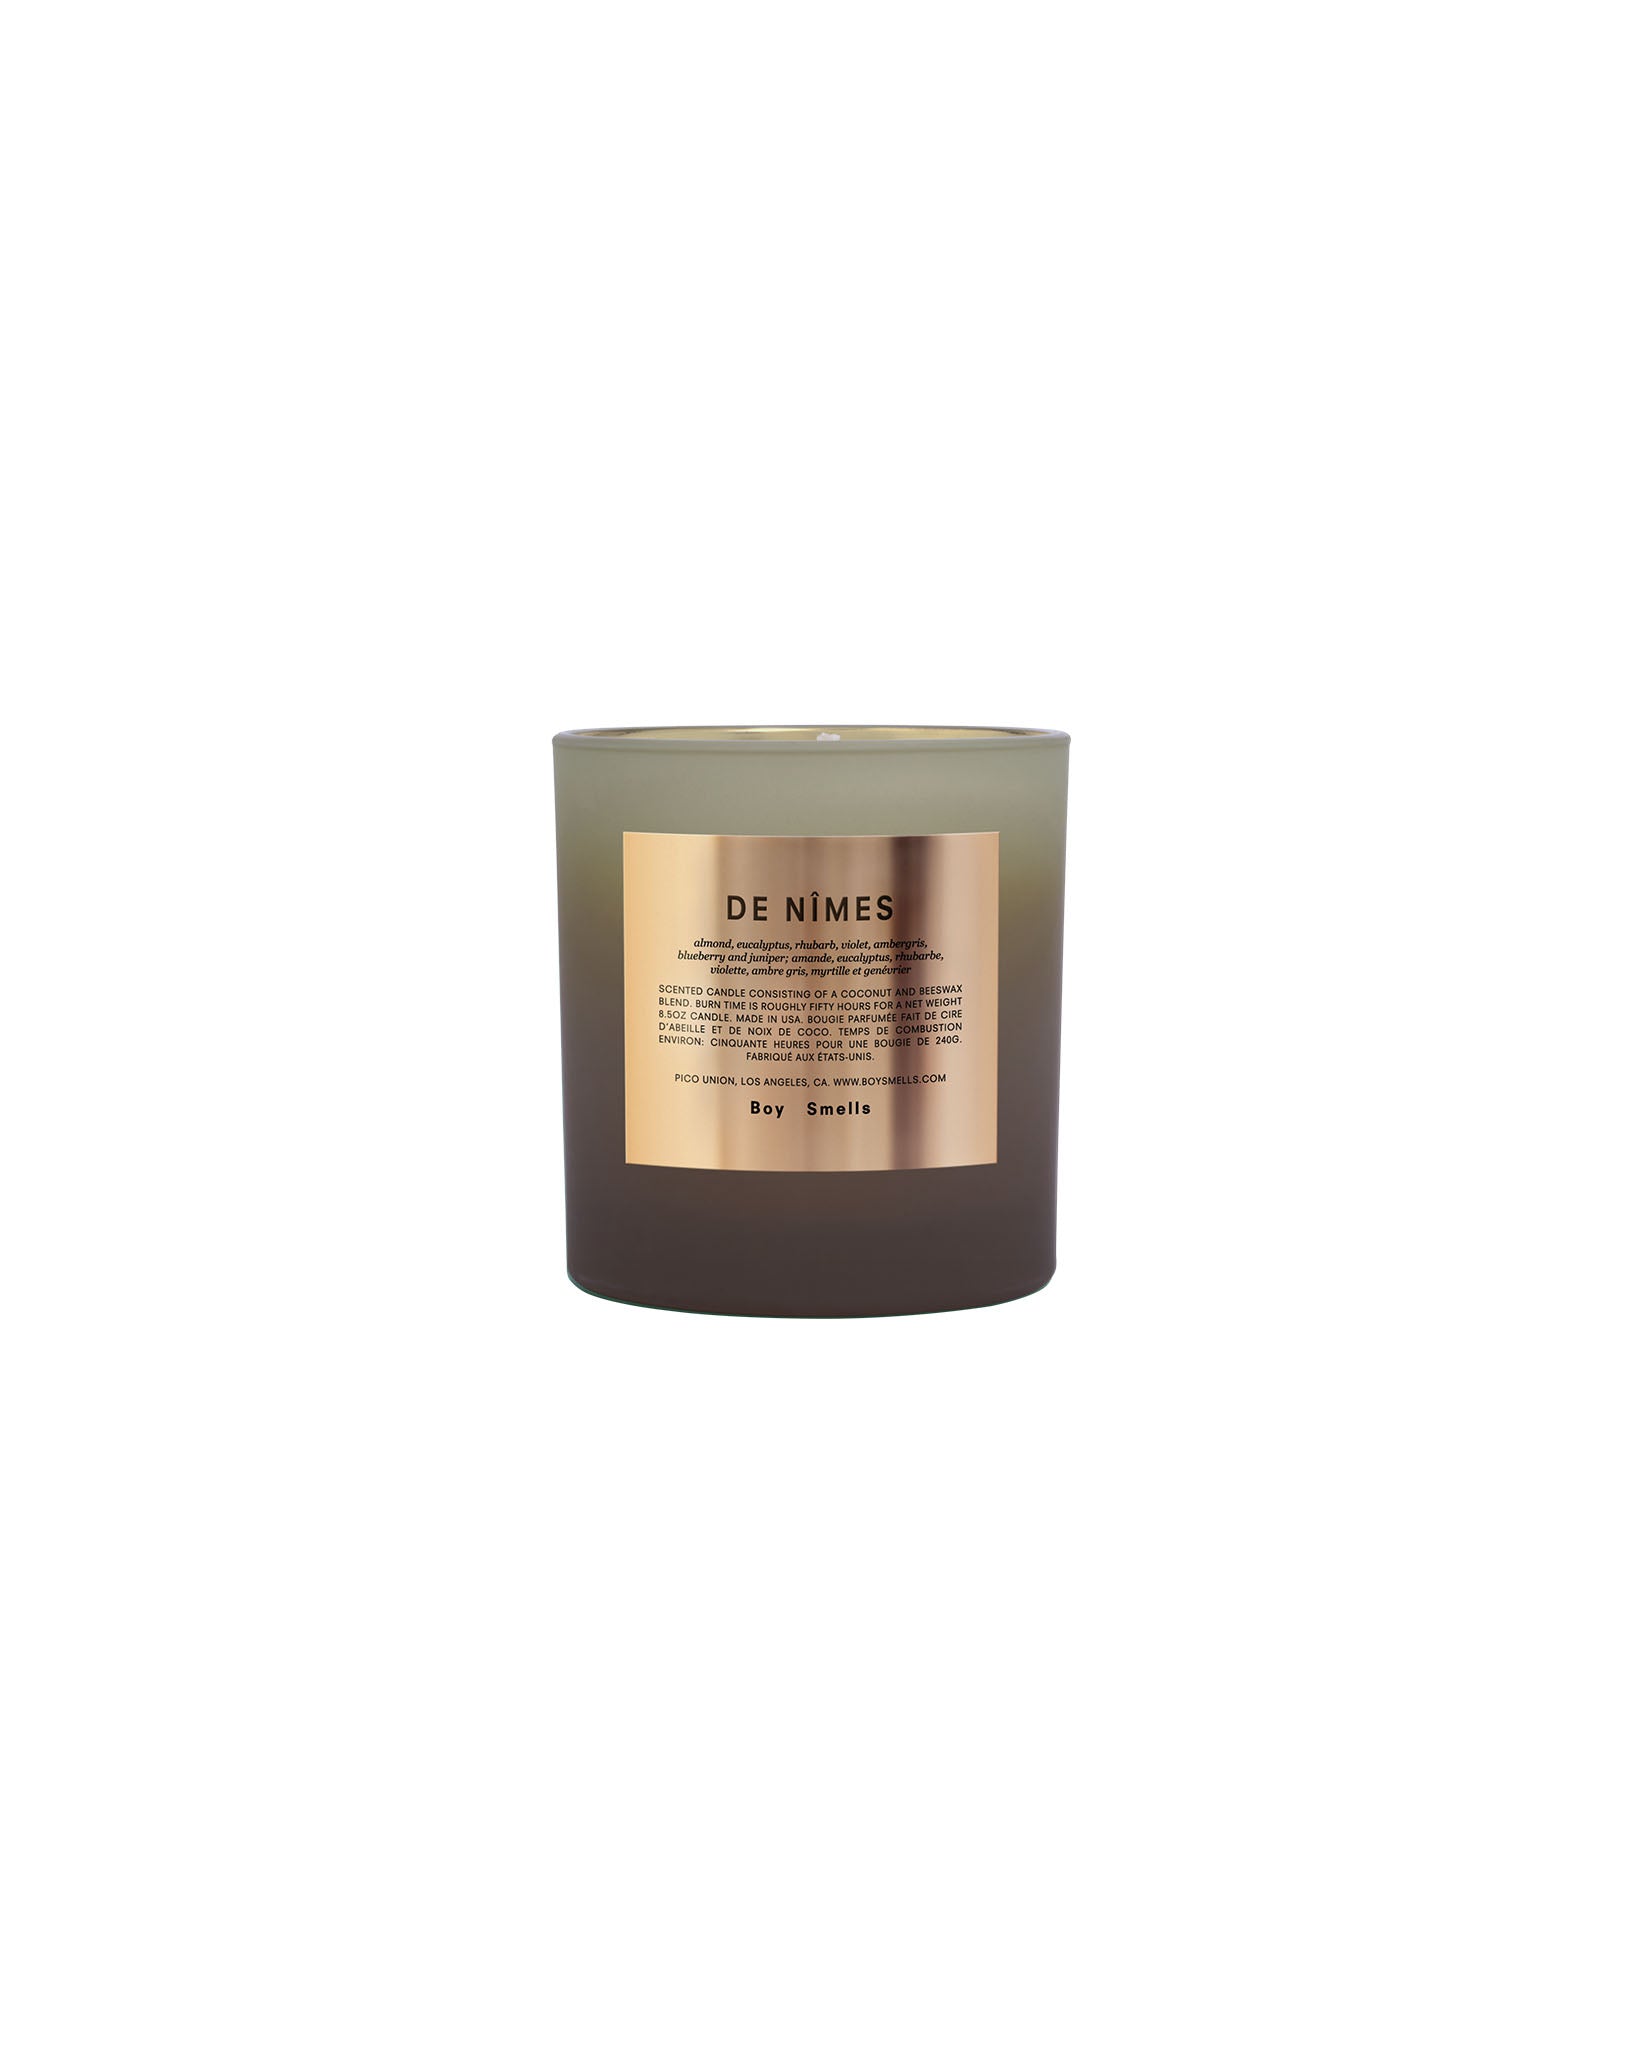 Holiday Rituals De Nimes Scented Candle 240g